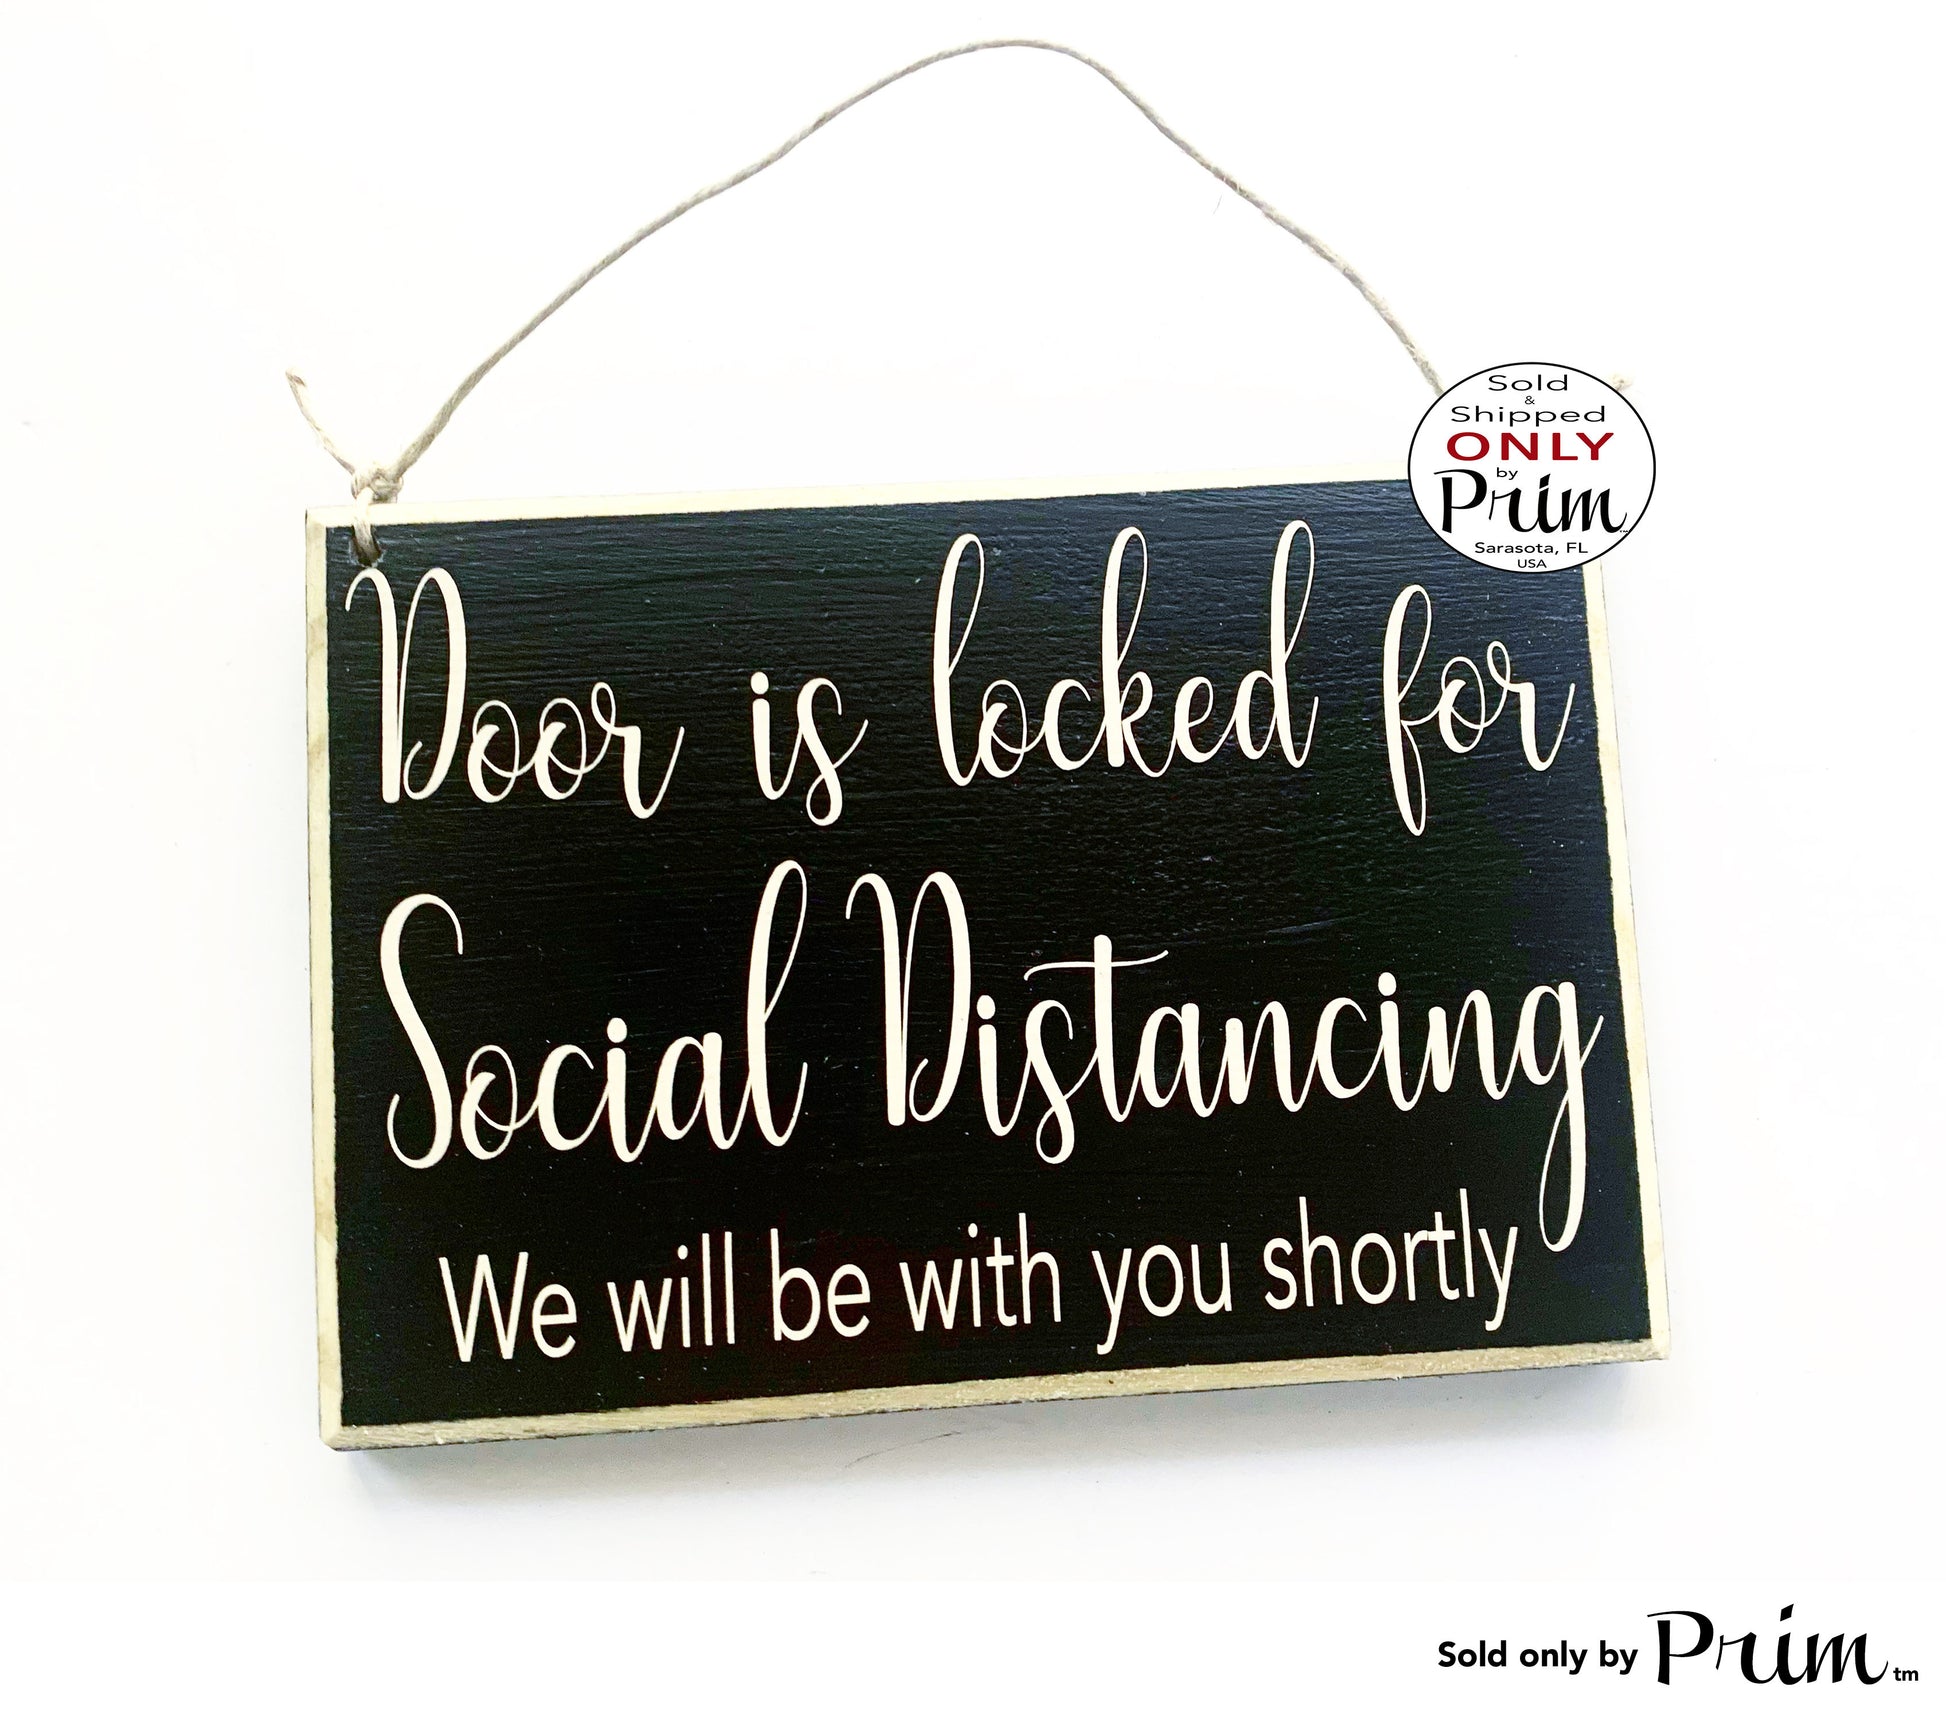 8x6 Door is Locked for Social Distancing Will Be With You Shortly Custom Wood Sign | Quarantine Zone Please Do Not Enter Disturb Door Plaque